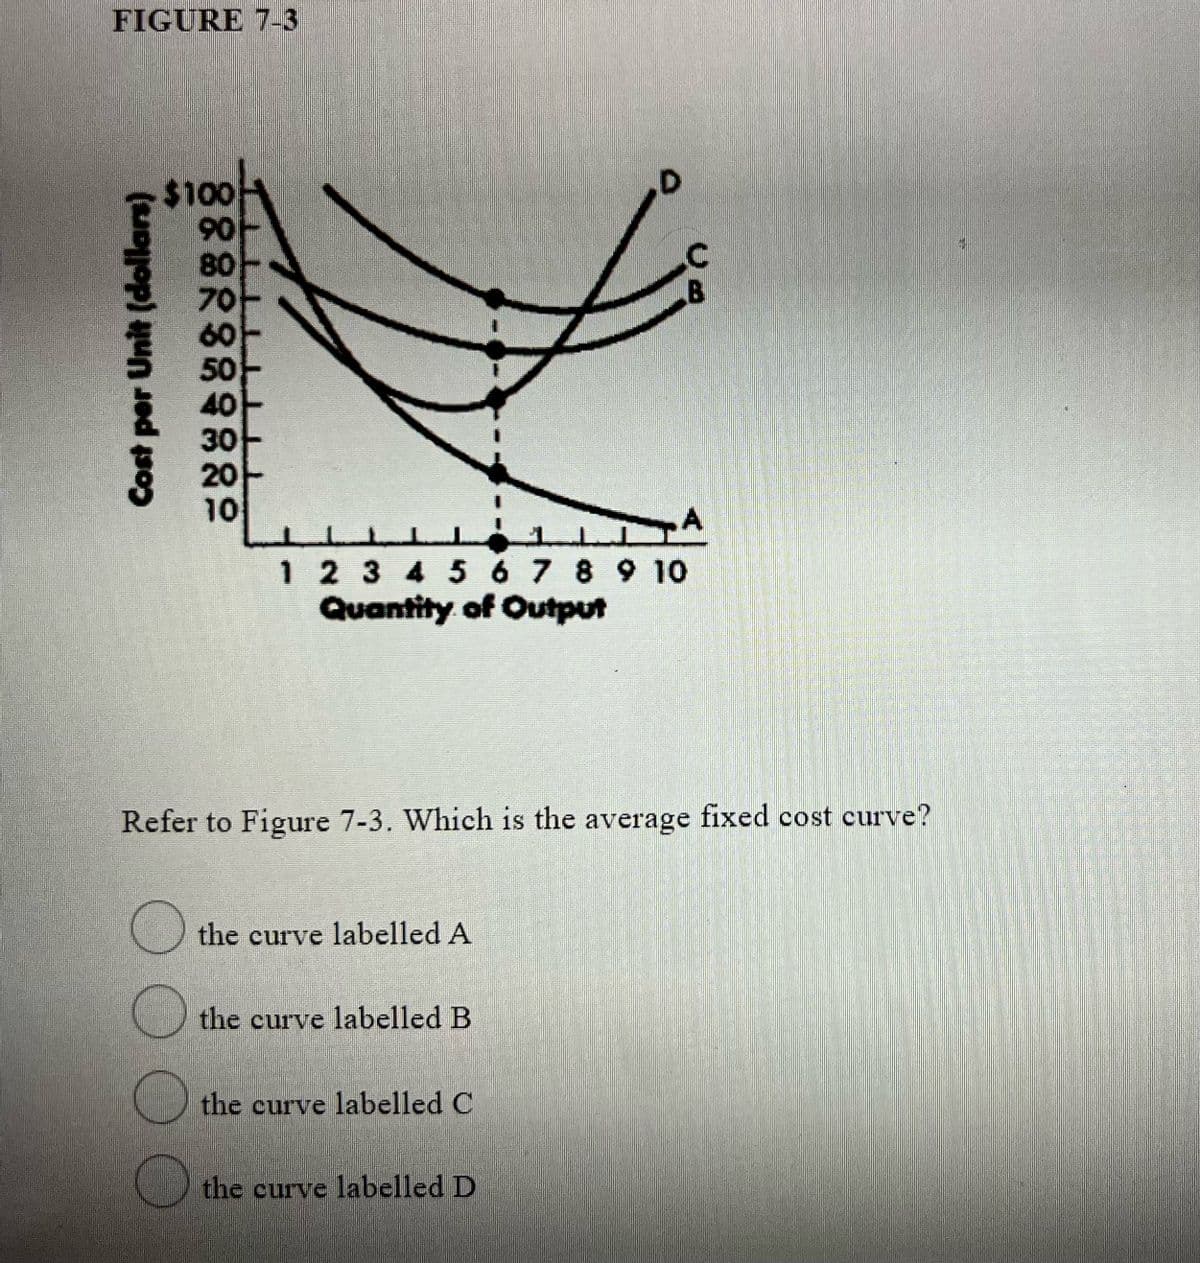 FIGURE 7-3
$100
90
8아
7아
60
50아
40
30아
20아
10
1 2 3 4 5 6 7 8 9 10
Quantity of Output
Refer to Figure 7-3. Which is the average fixed cost curve?
the curve labelled A
the curve labelled B
the curve labelled C
the curve labelled D
Cost per Unit (dollars)
